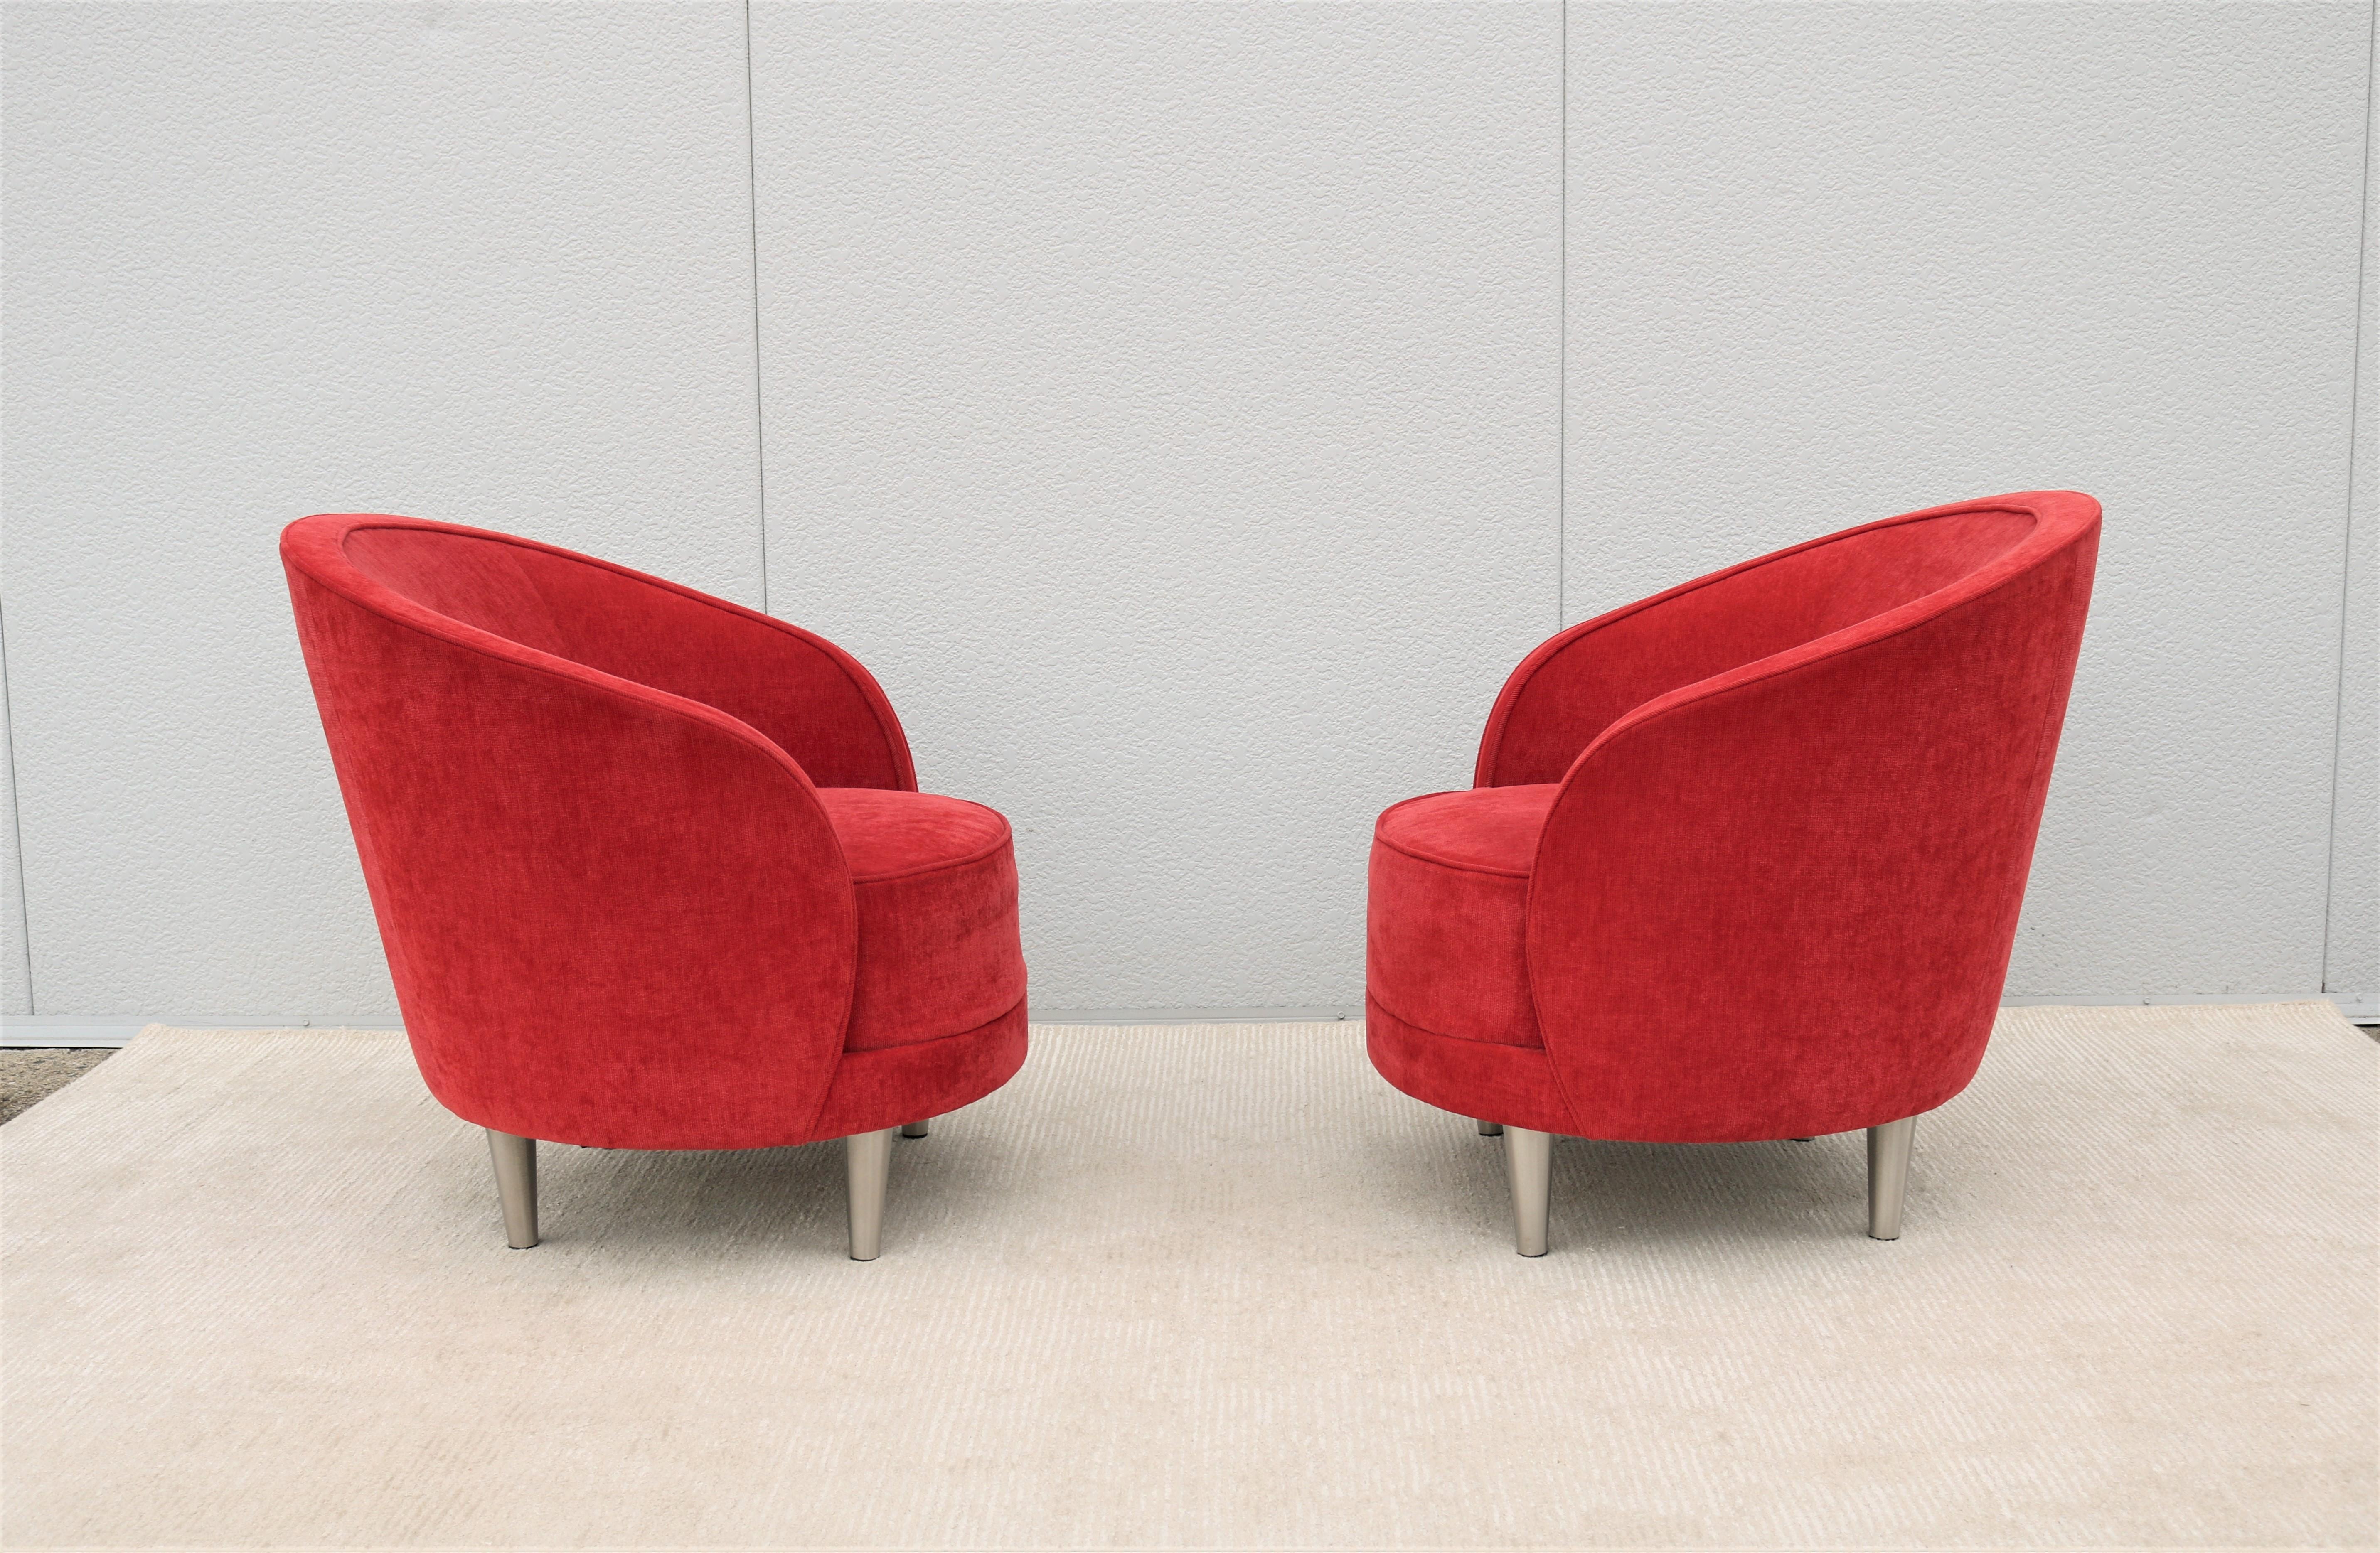 Contemporary Modern Martin Brattrud Kinsale Red Barrel Lounge Chairs, a Pair For Sale 4